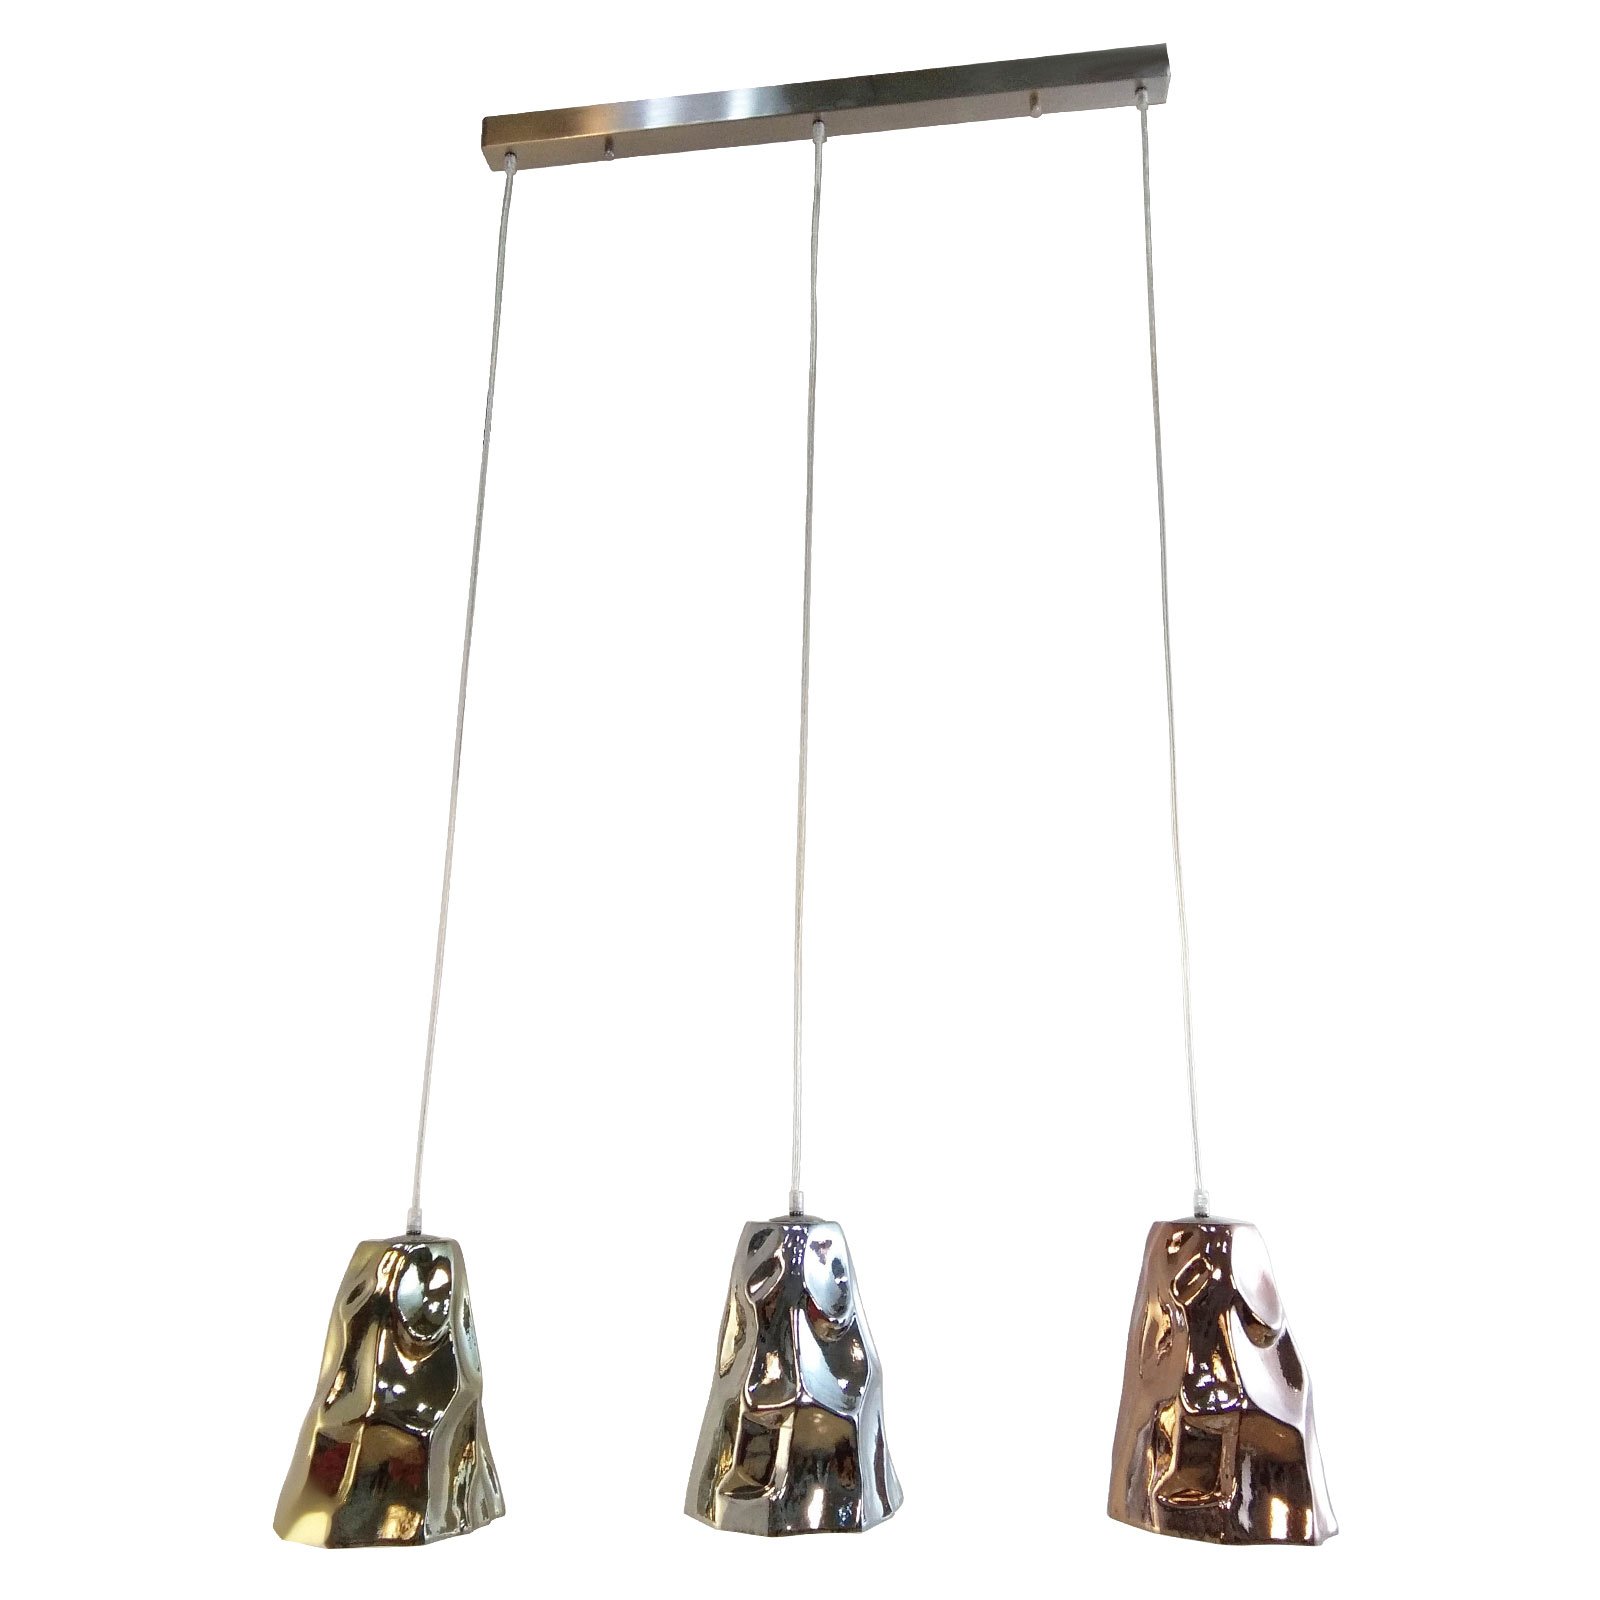 KARE Crumble Dining Tricolore hanging light 99cm long